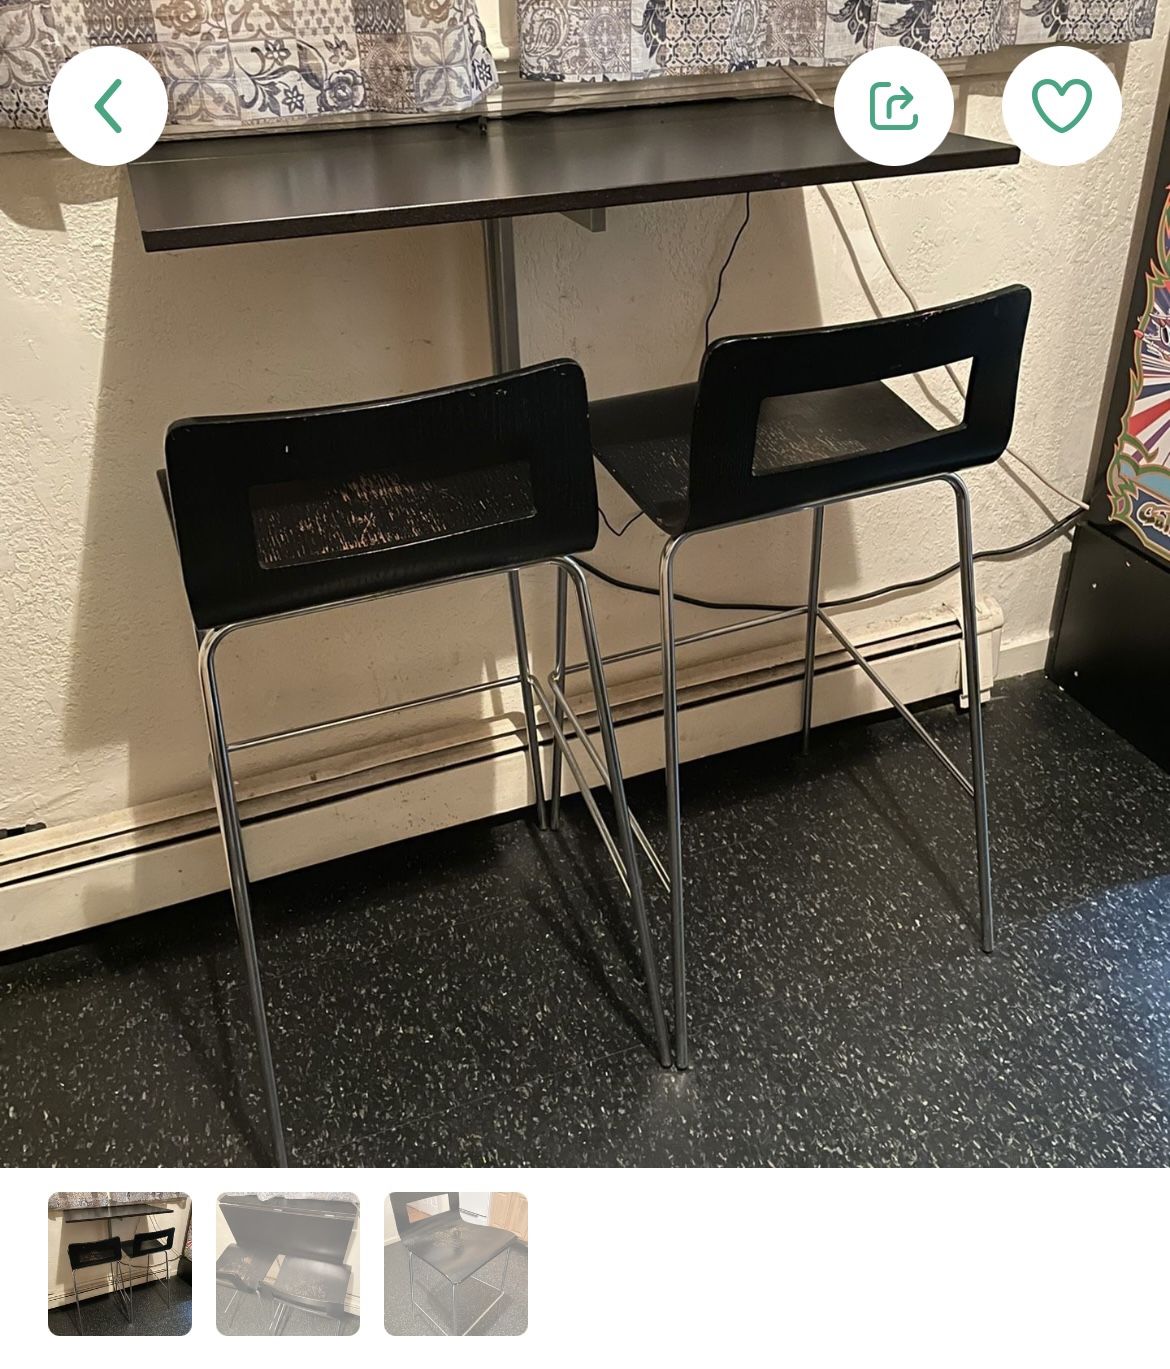 Folding breakfast Table w/ Bar Height Chairs